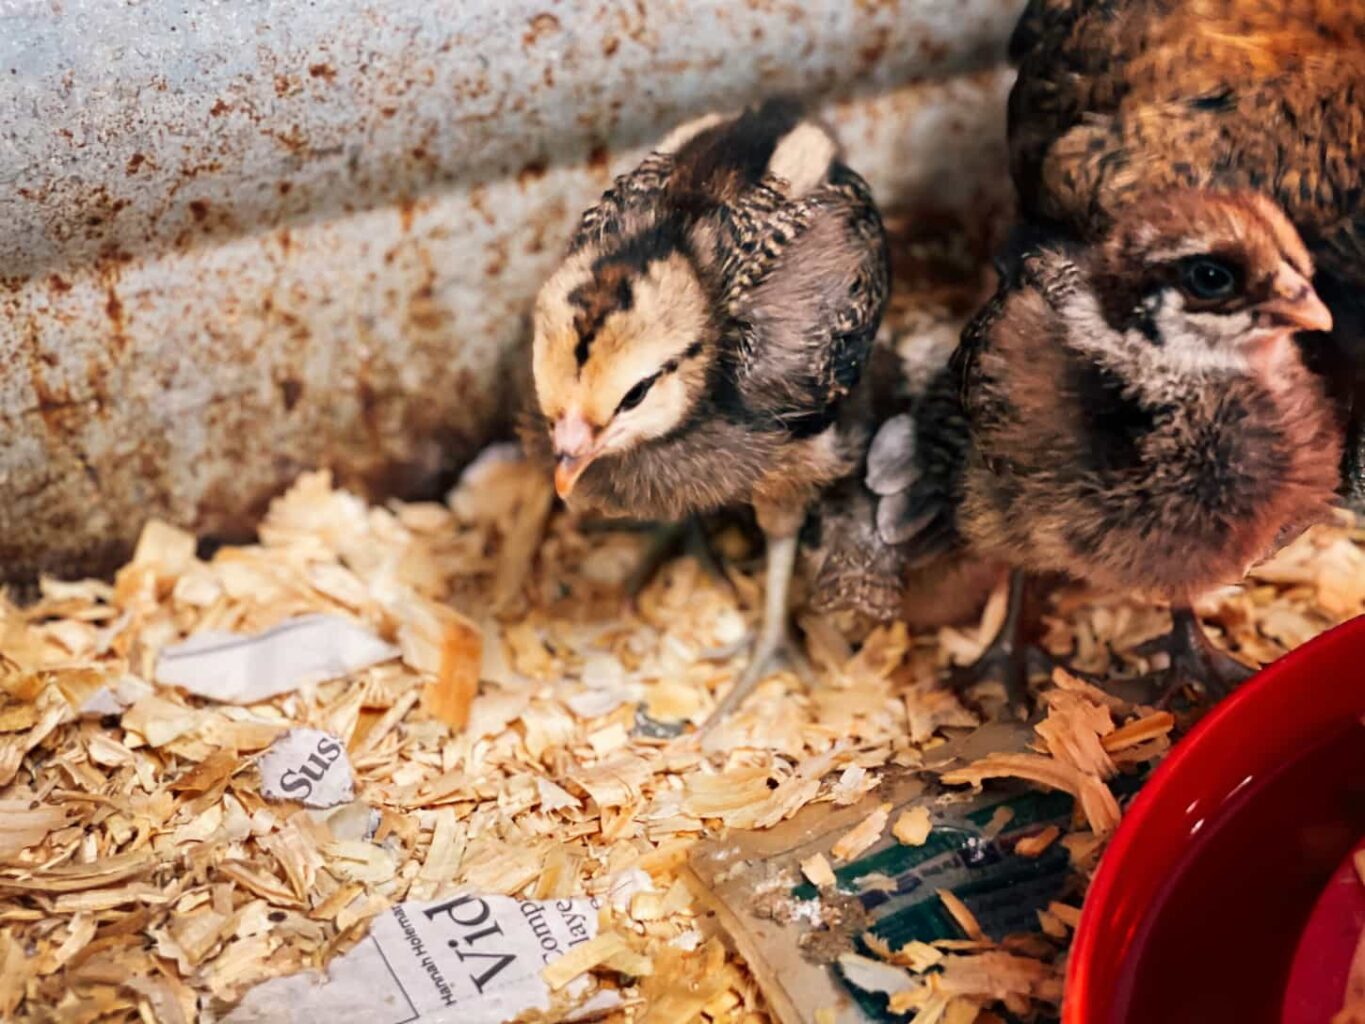 An image of two baby chickens in a brooder.